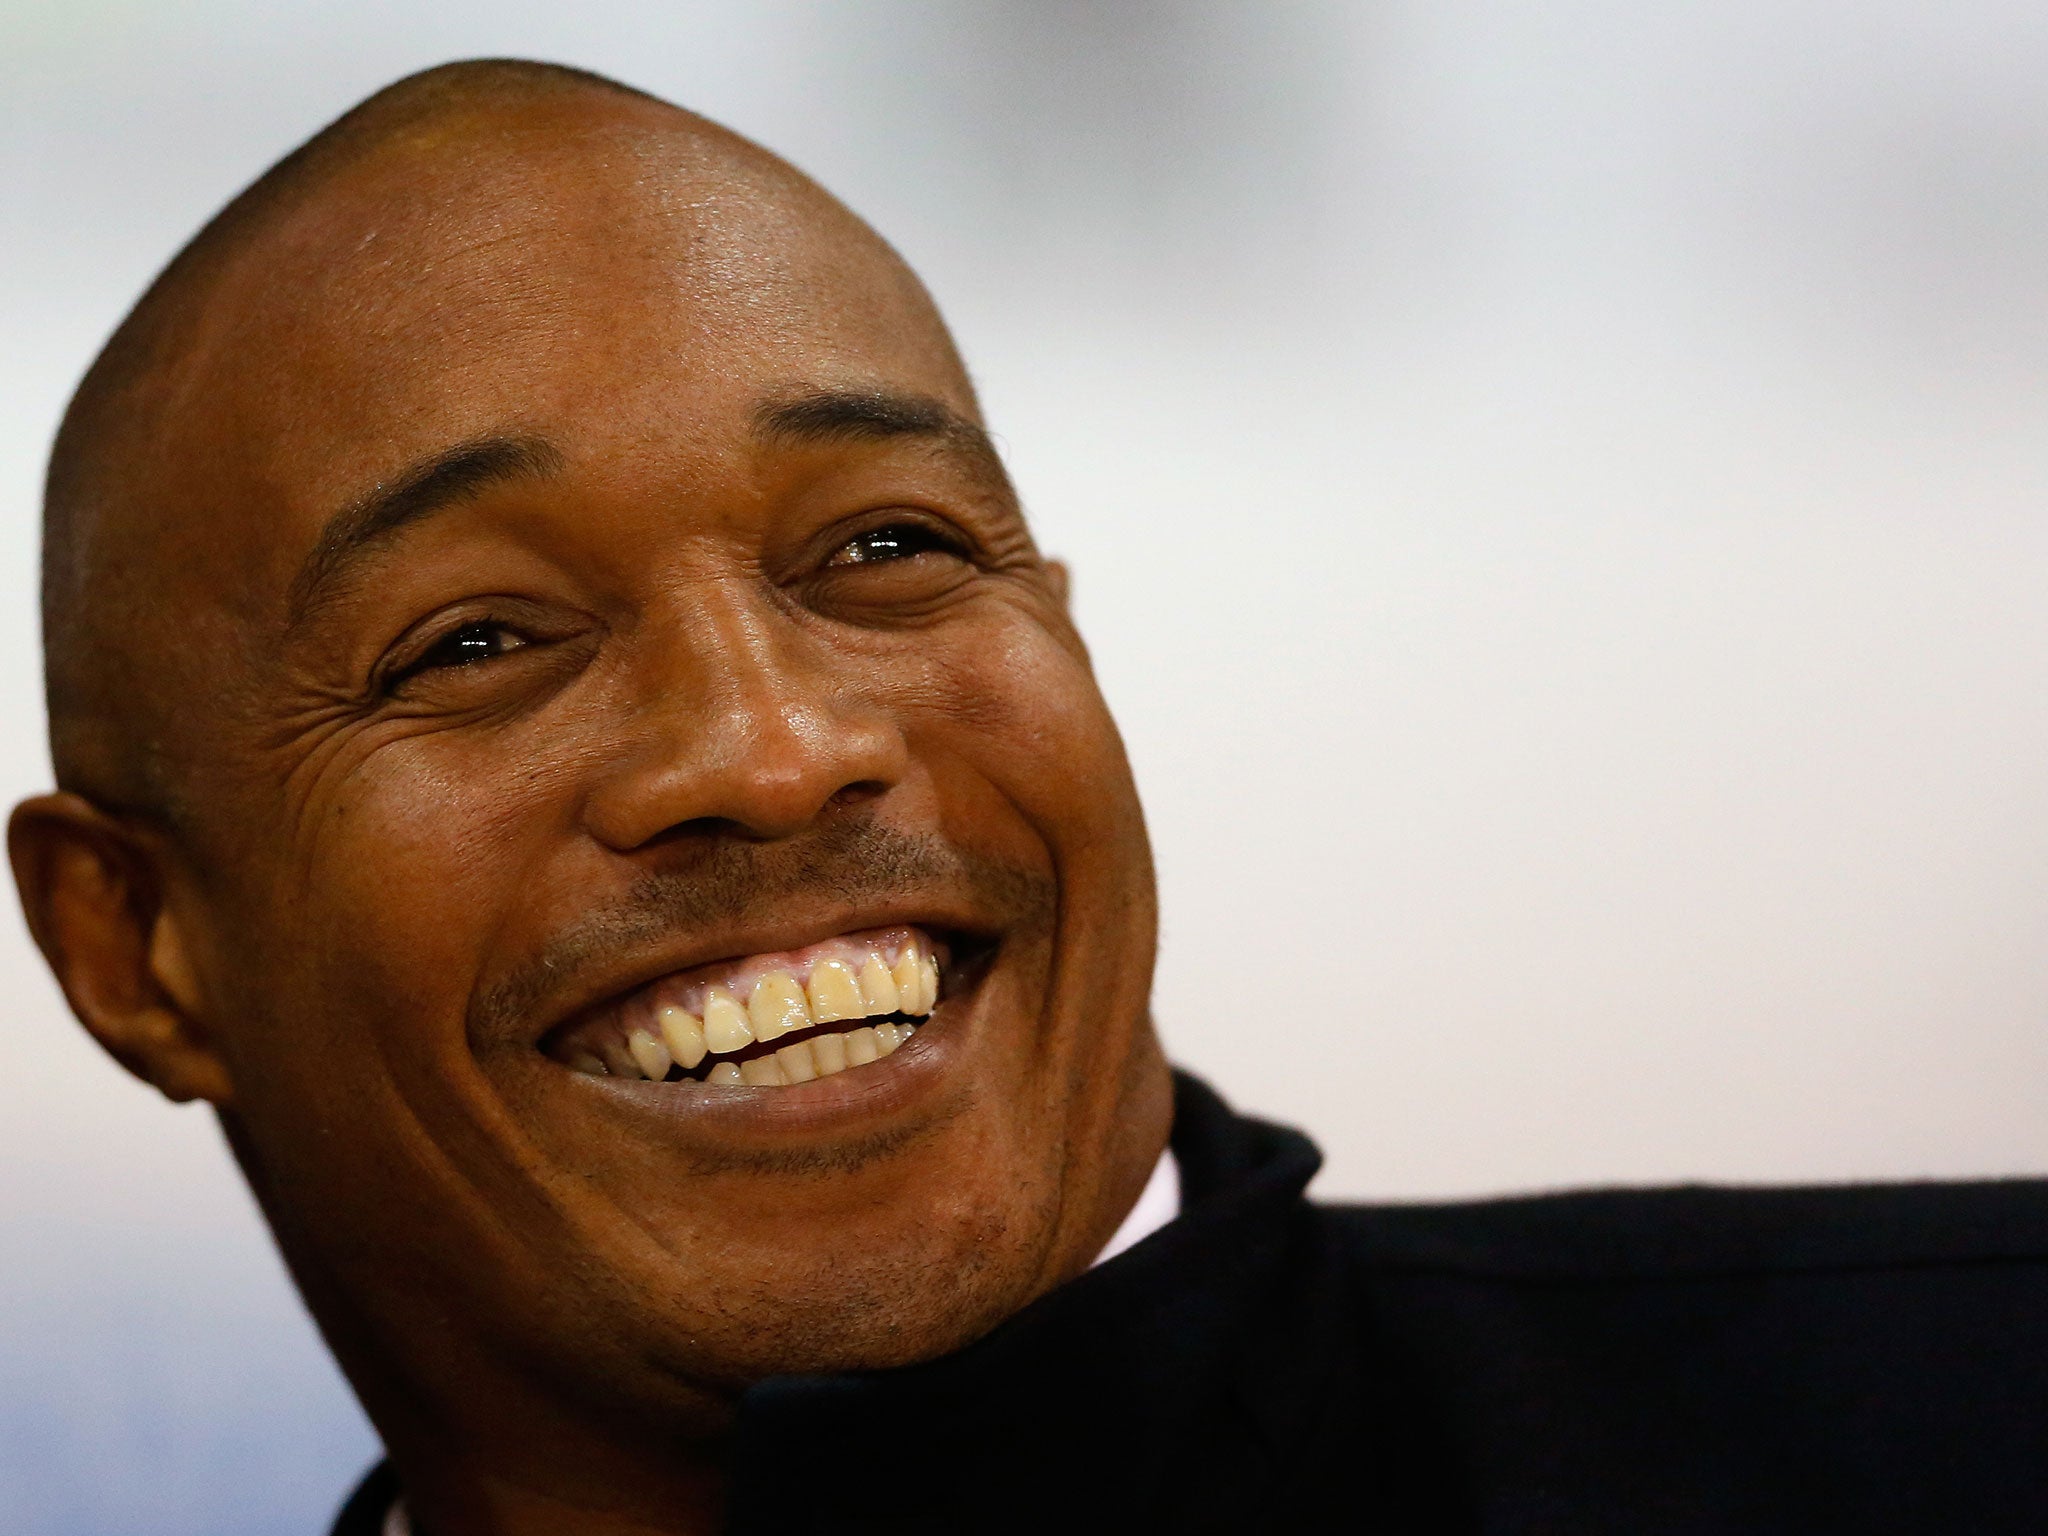 Paul Ince is in the rare position of having played for both Liverpool and Manchester United